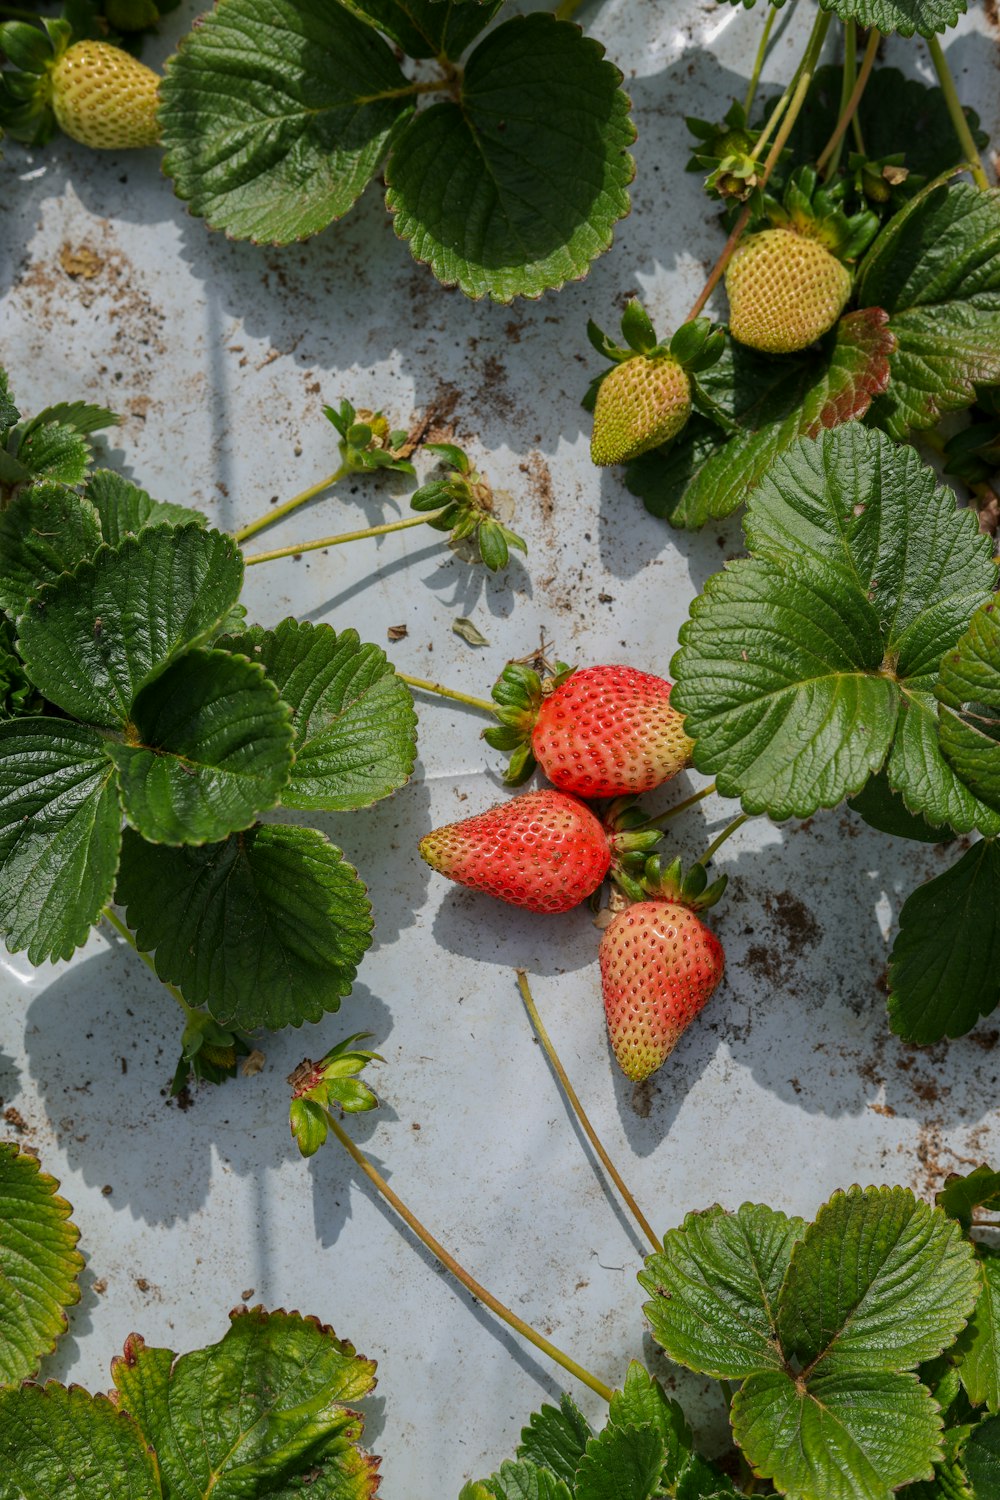 red strawberries on green leaves